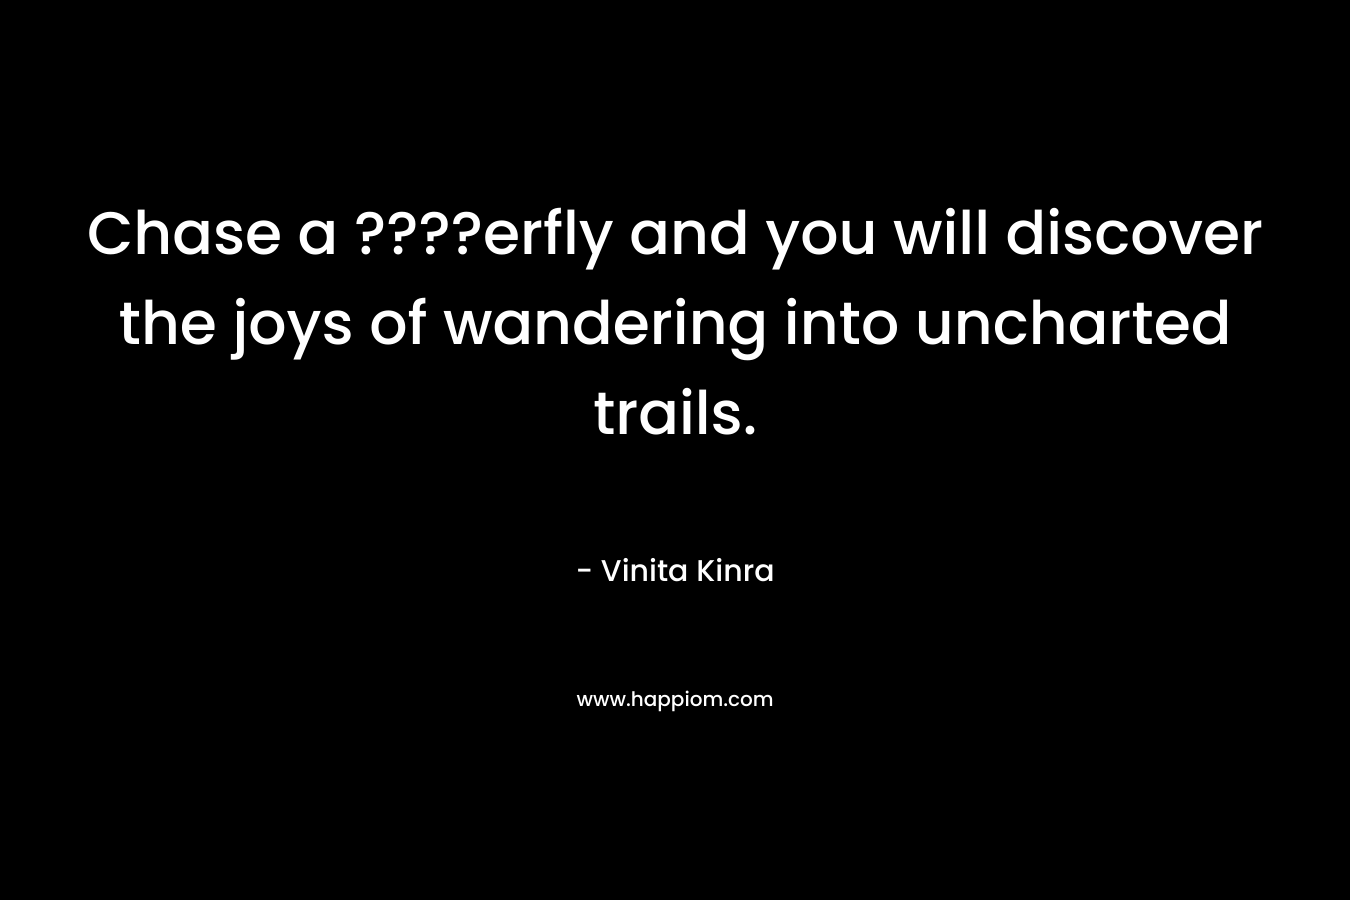 Chase a ????erfly and you will discover the joys of wandering into uncharted trails. – Vinita Kinra